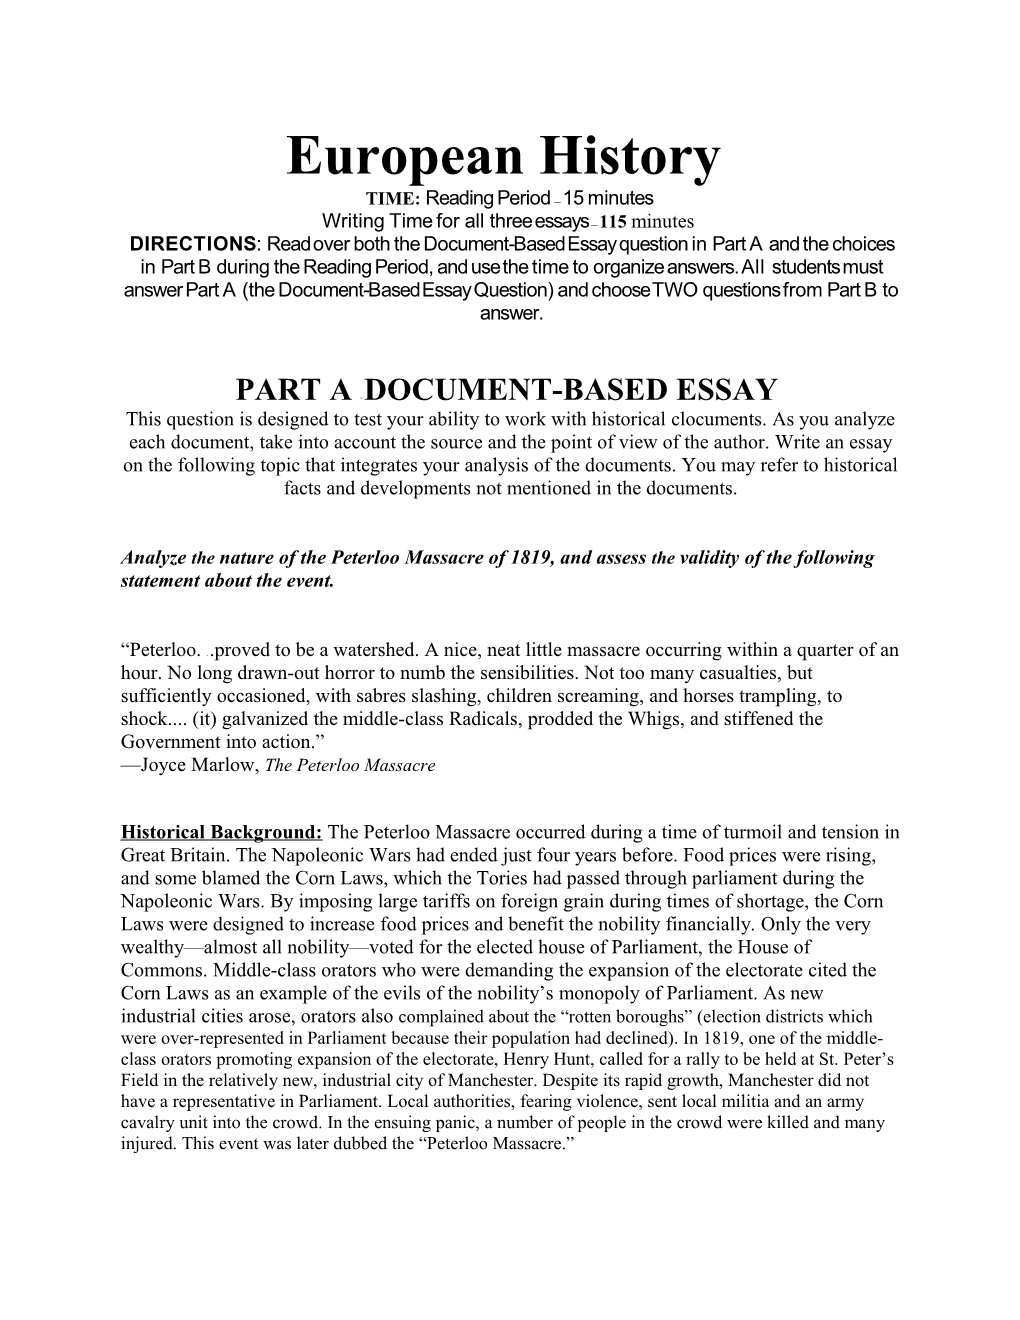 European History TIME: Reading Period 15 Minutes Writing Time for All Three Essays 115